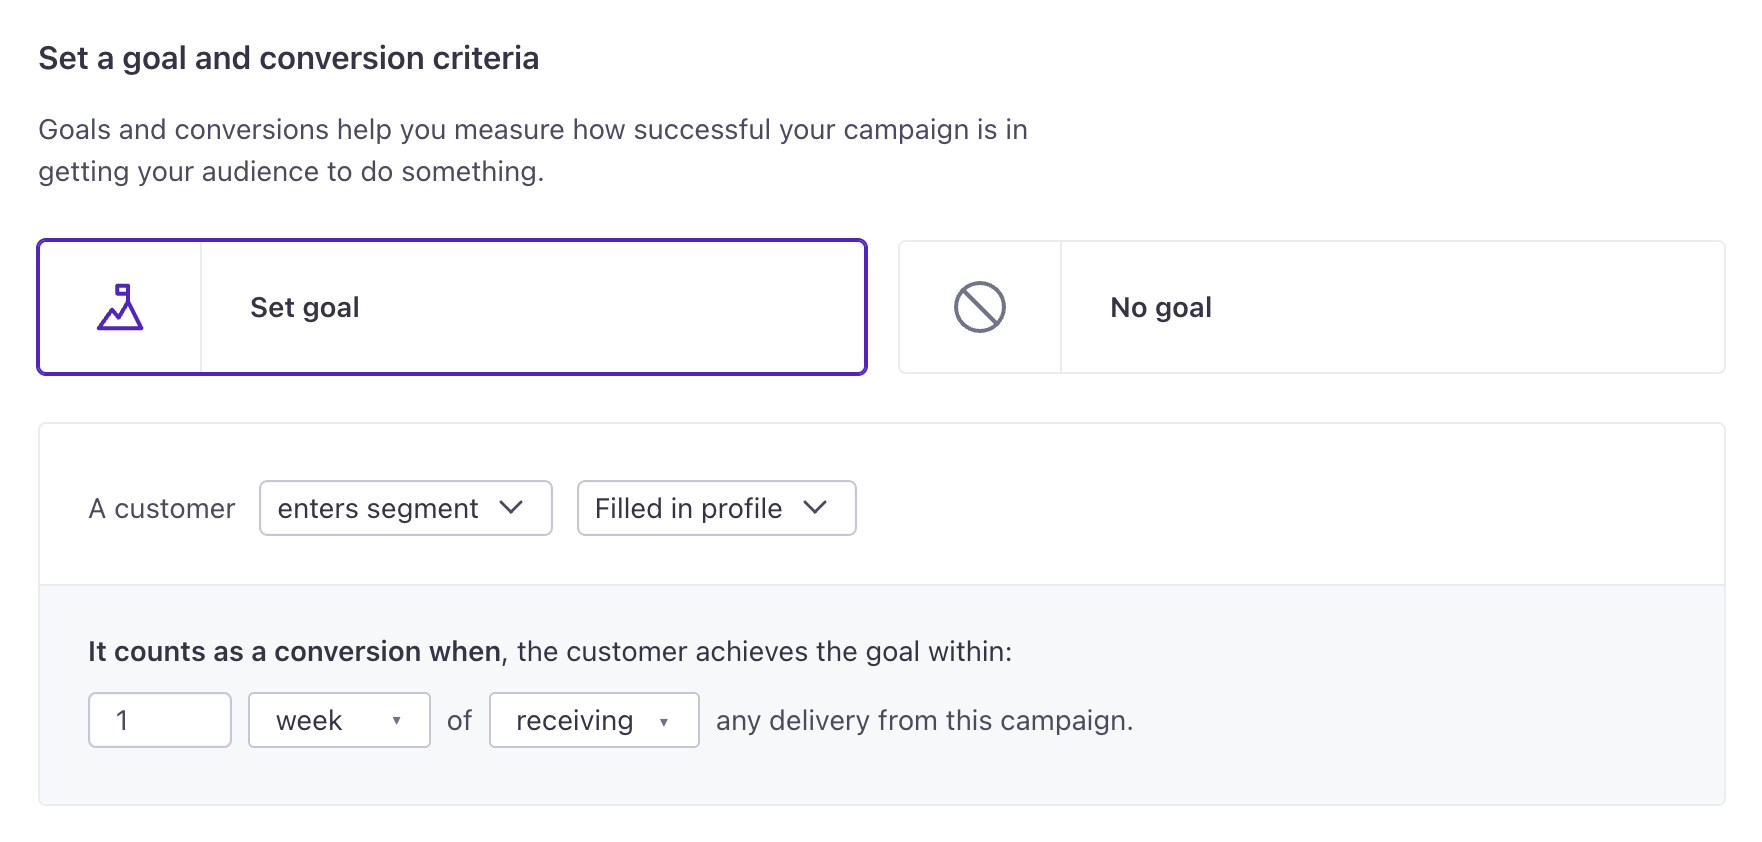 Set goal is selected at the top instead of No goal. Under that, the goal is defined as when a customer enters the segment: Filled in profile. It counts as a conversion when the customer achieves the goal within 1 week of receiving any delivery from this campaign.